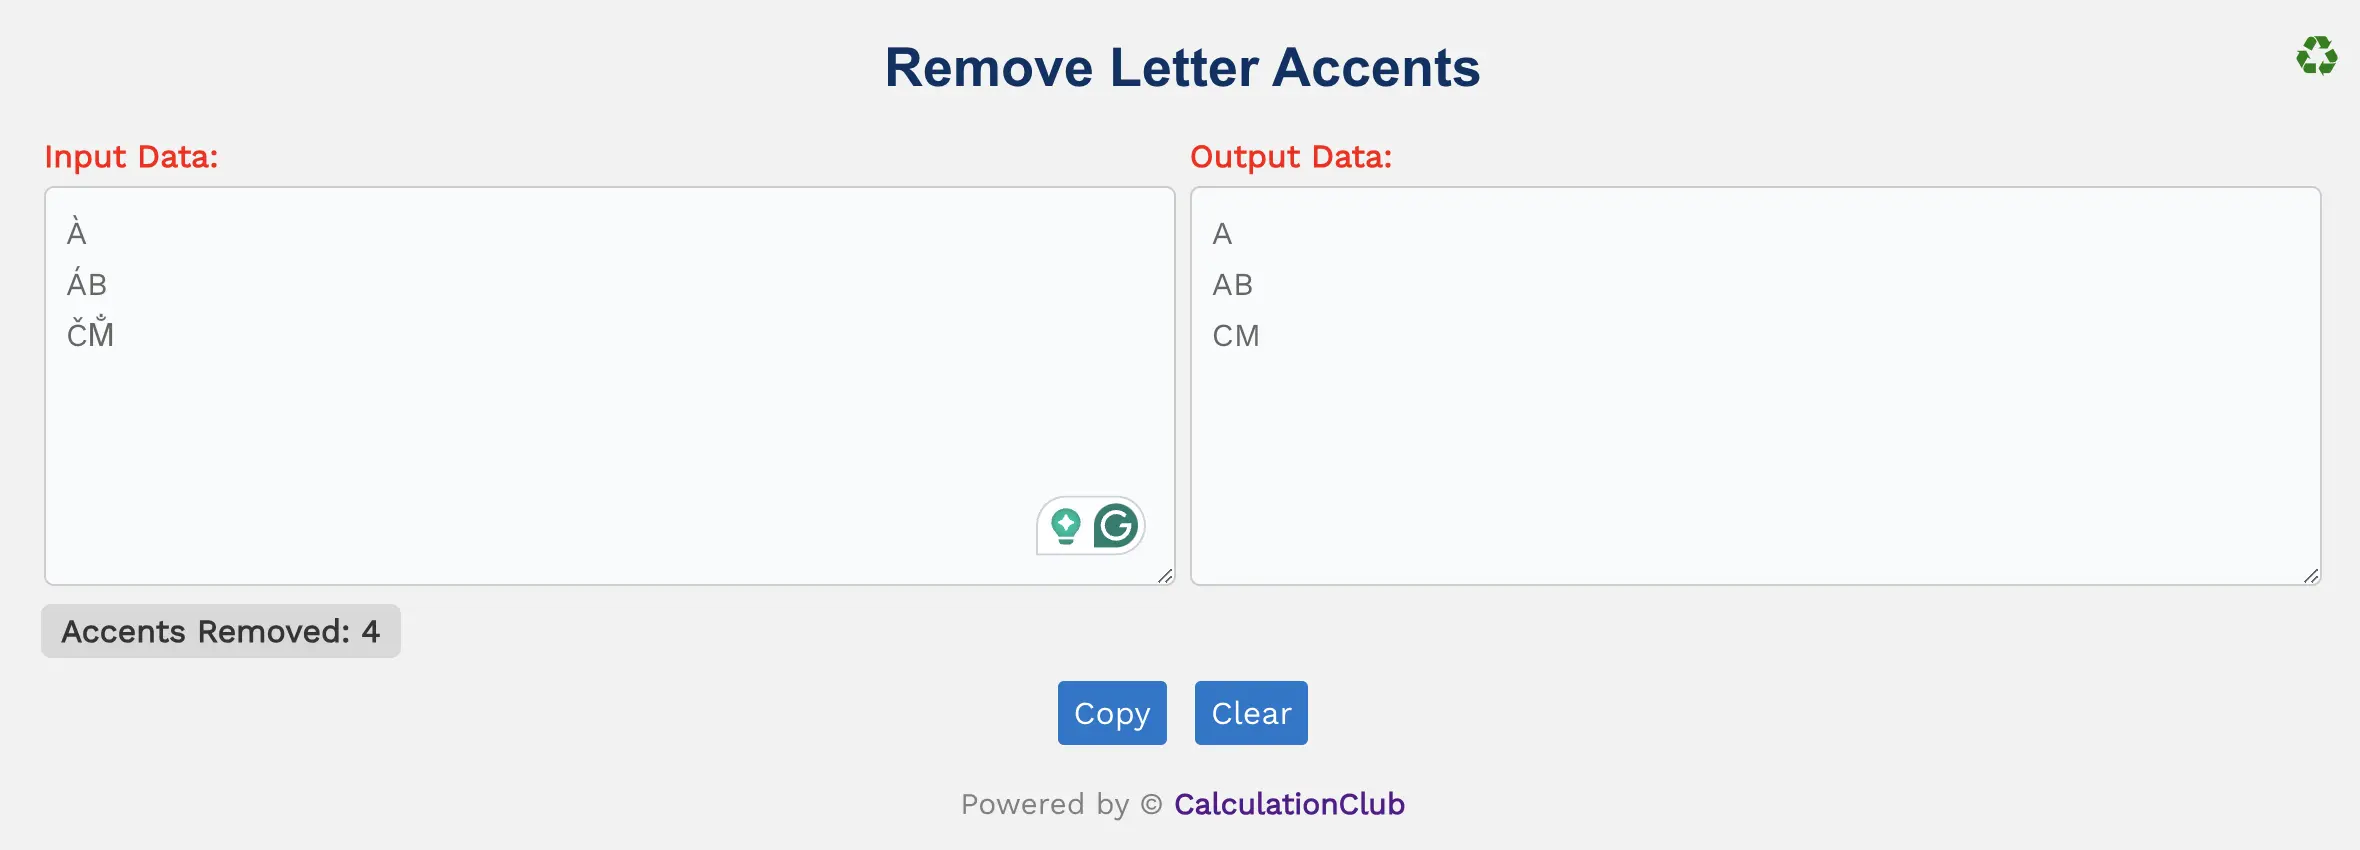 Remove Letter Accents